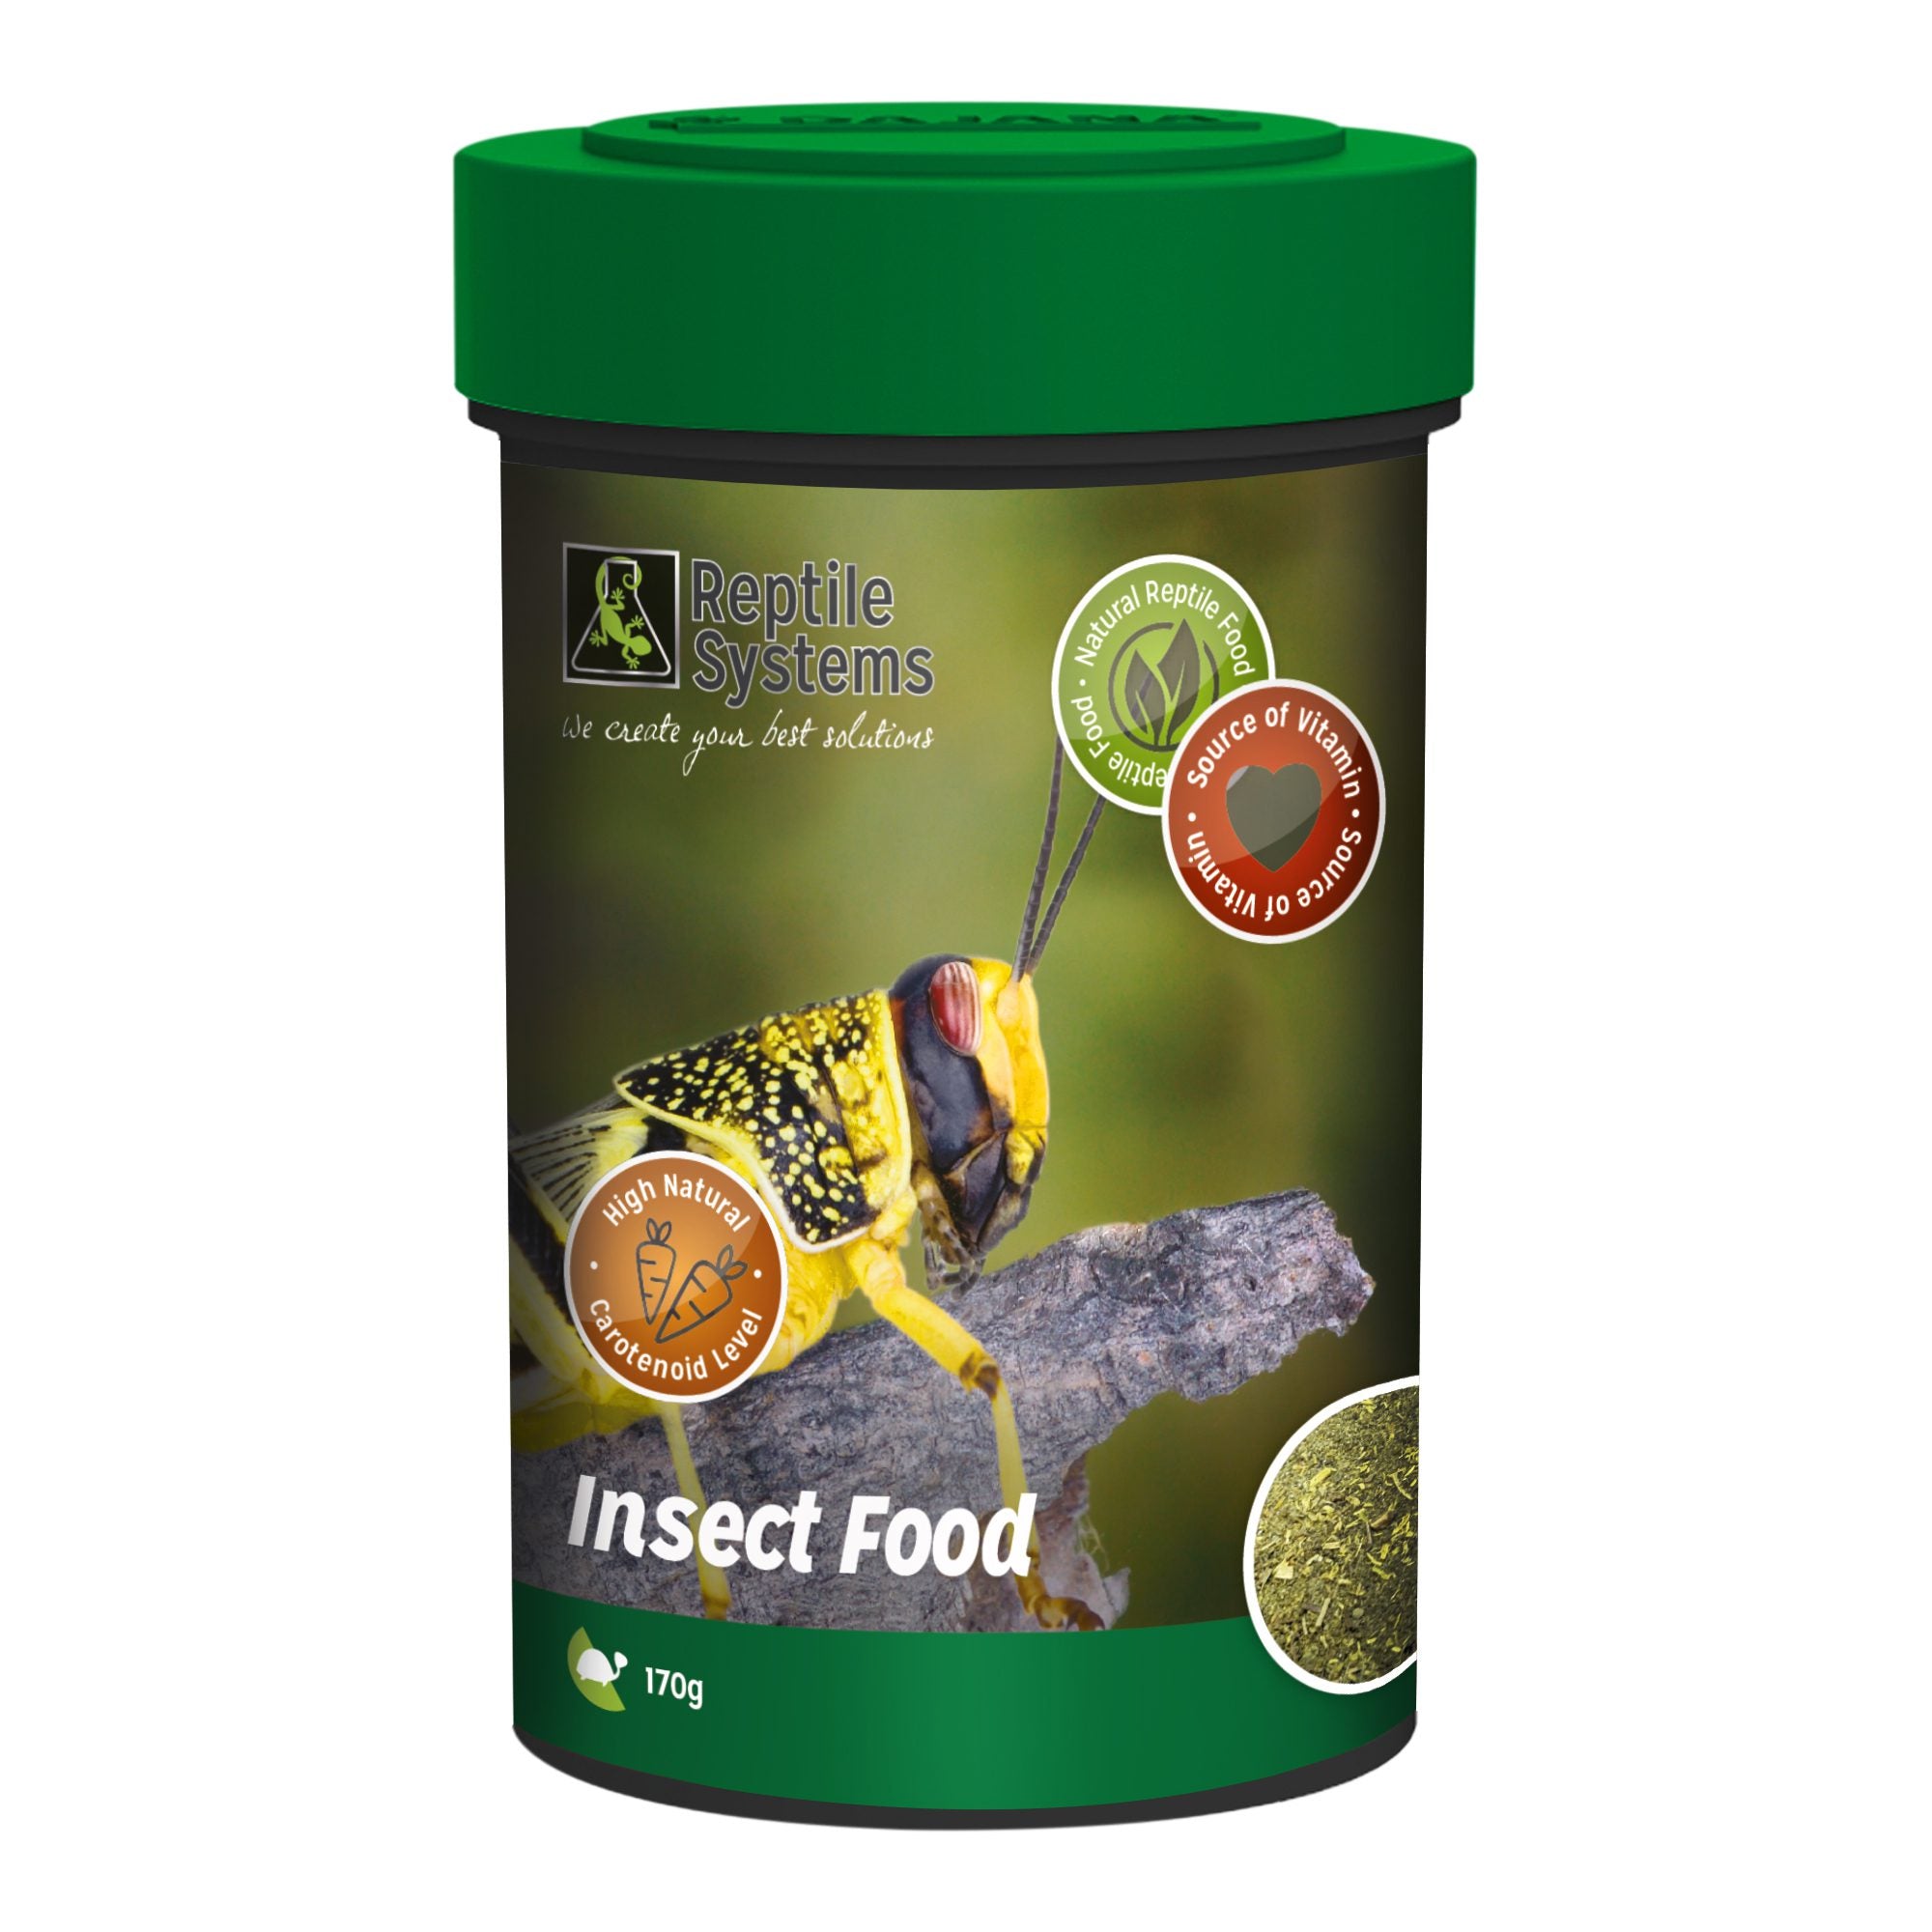 Insect Food, 170g